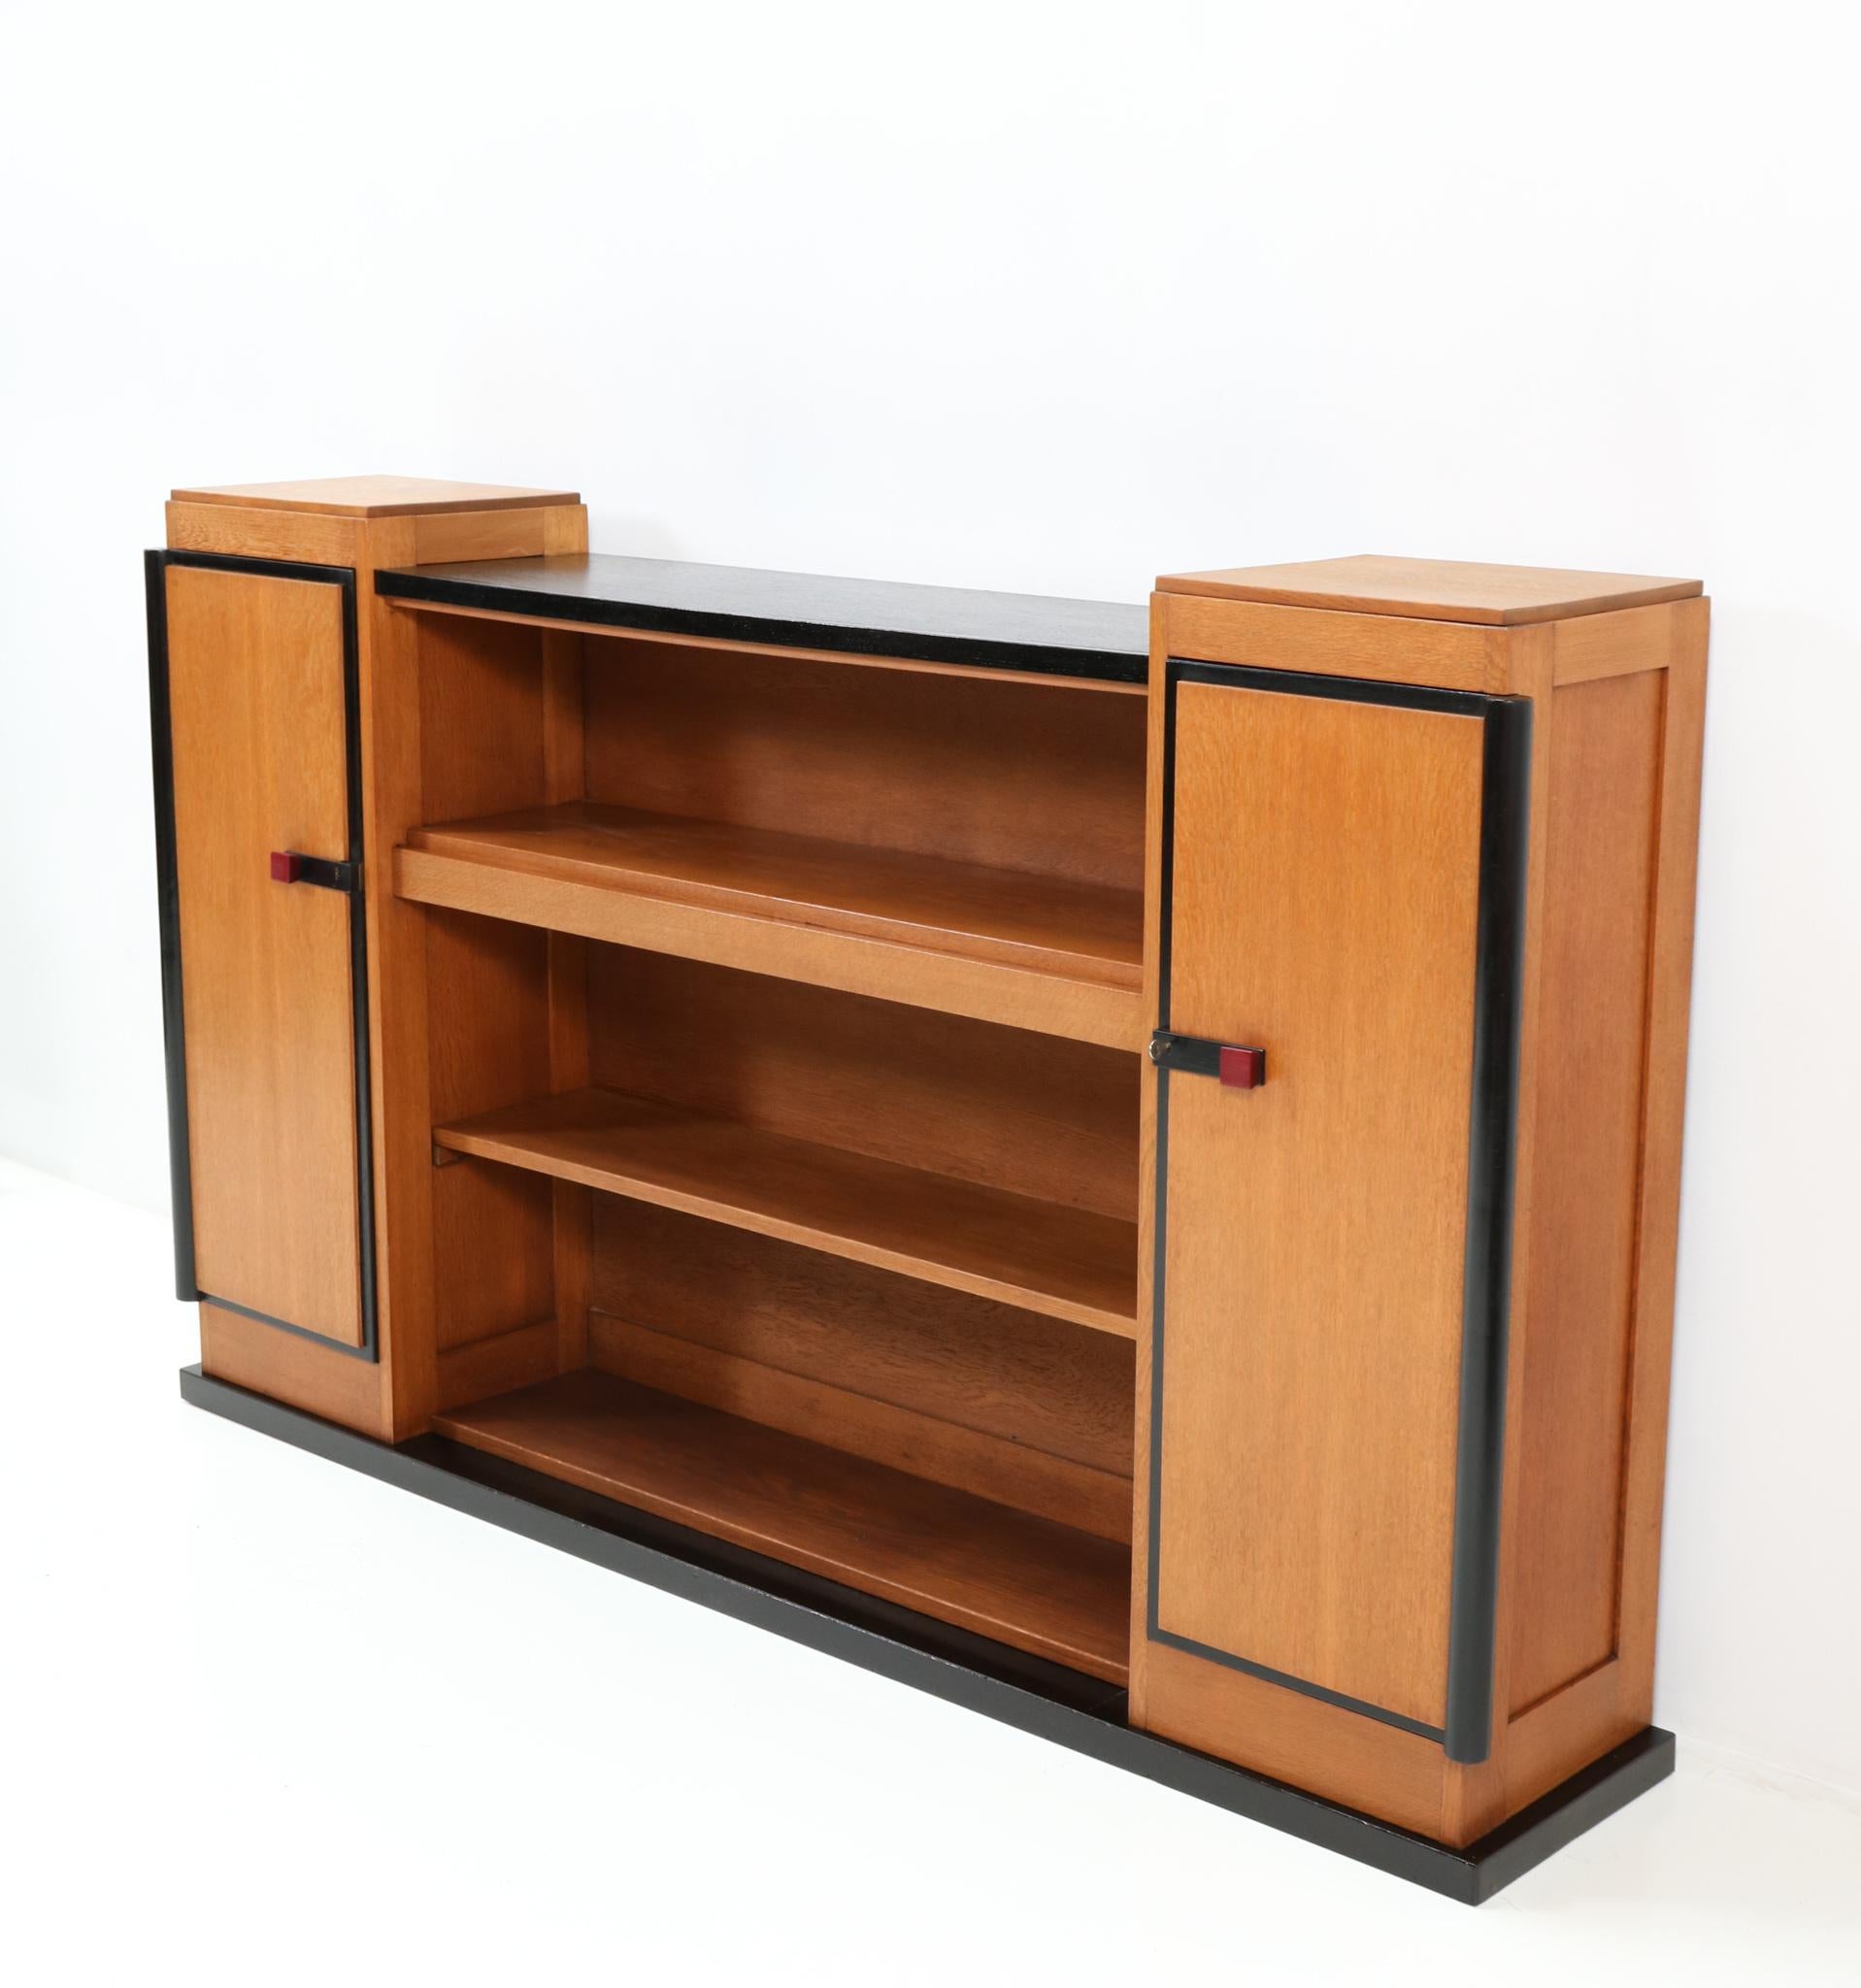  Art Deco Modernist Oak Bookcase or Credenza by Jan Brunott, 1920s In Good Condition For Sale In Amsterdam, NL